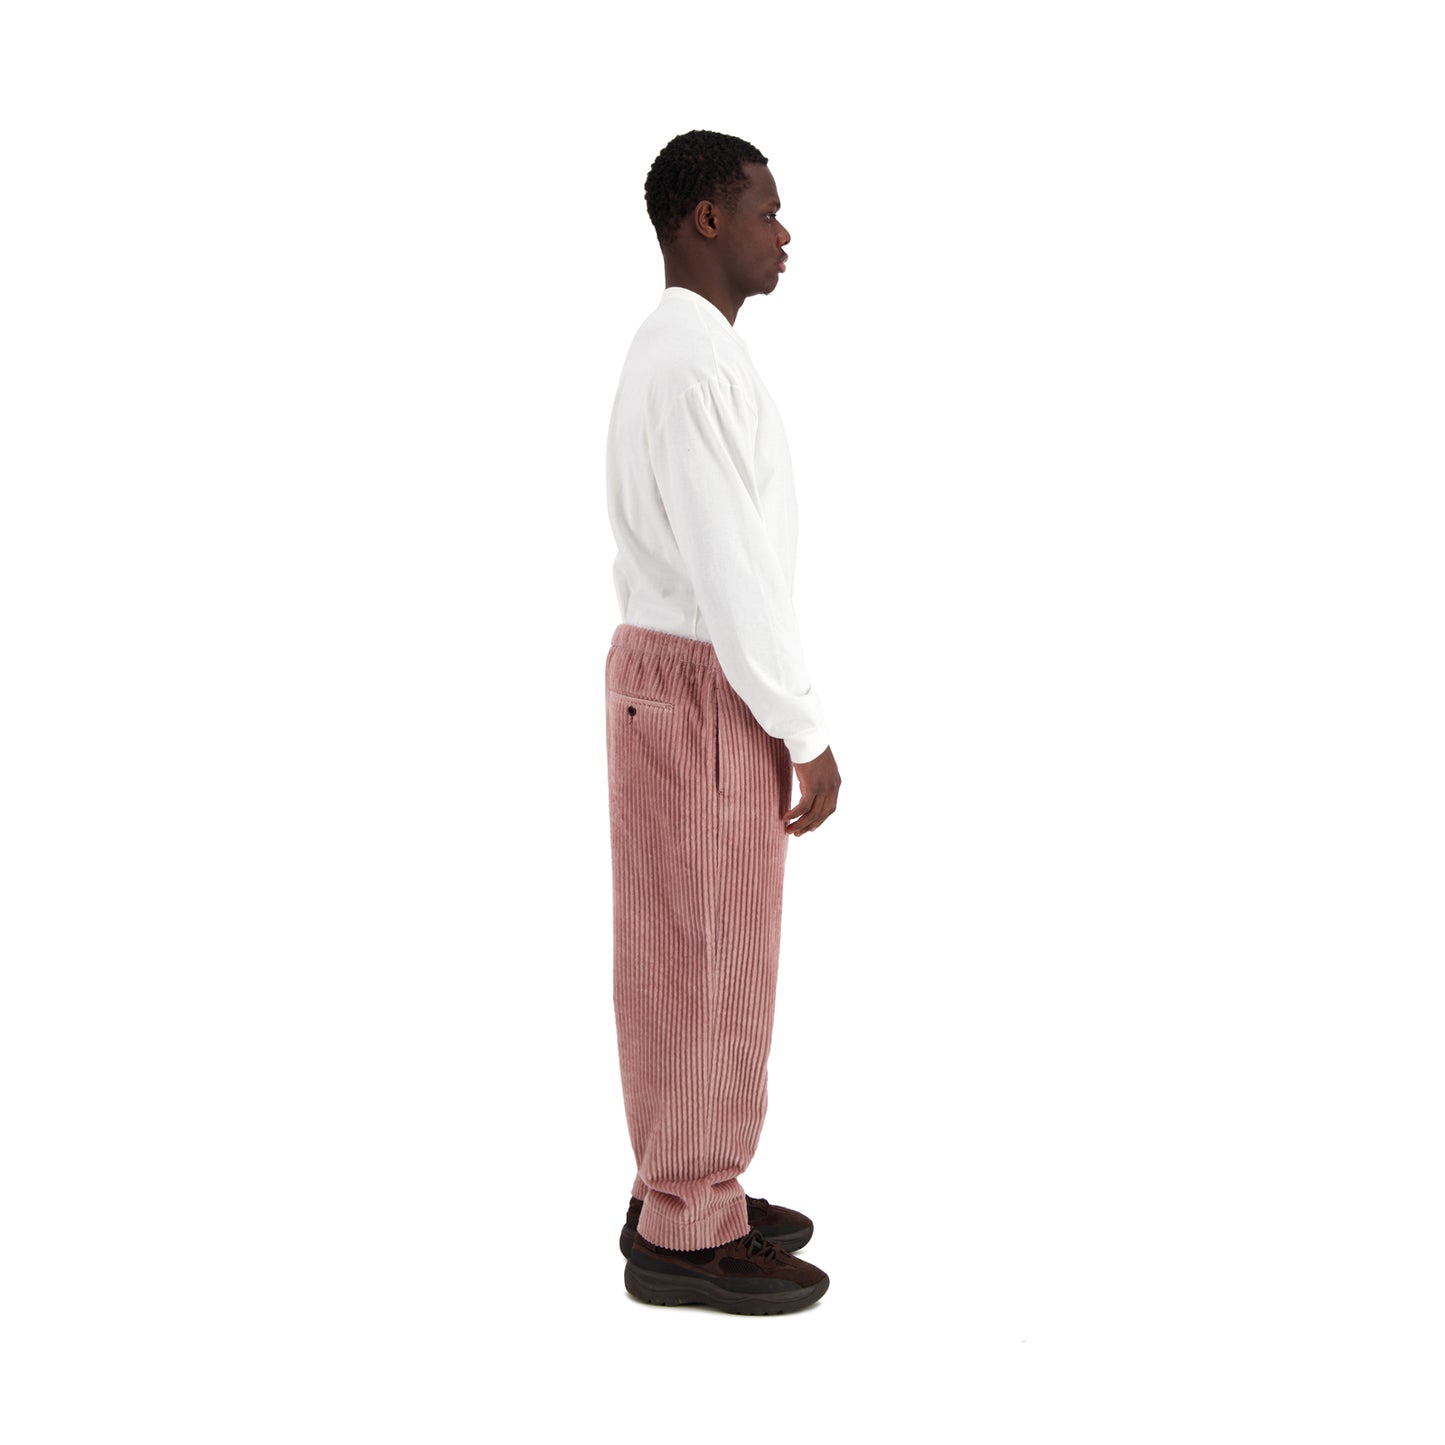 Ed Unlined Exaggerated Cotton Corduroy Drawstring Trousers Antique Pink